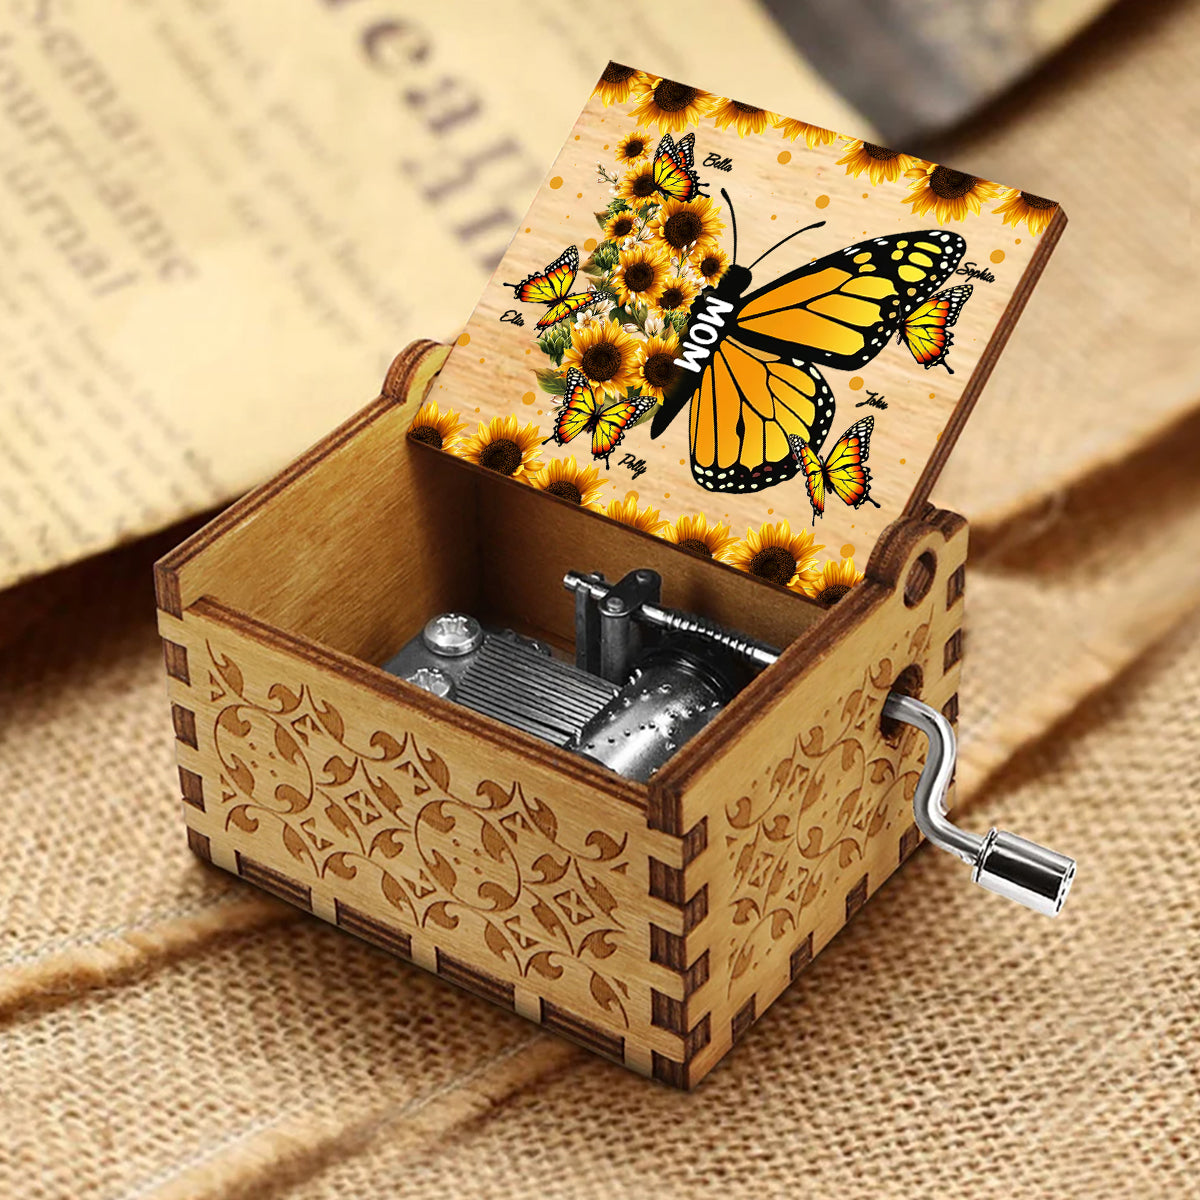 We Love You - Personalized Mother's Day Mother Hand Crank Music Box